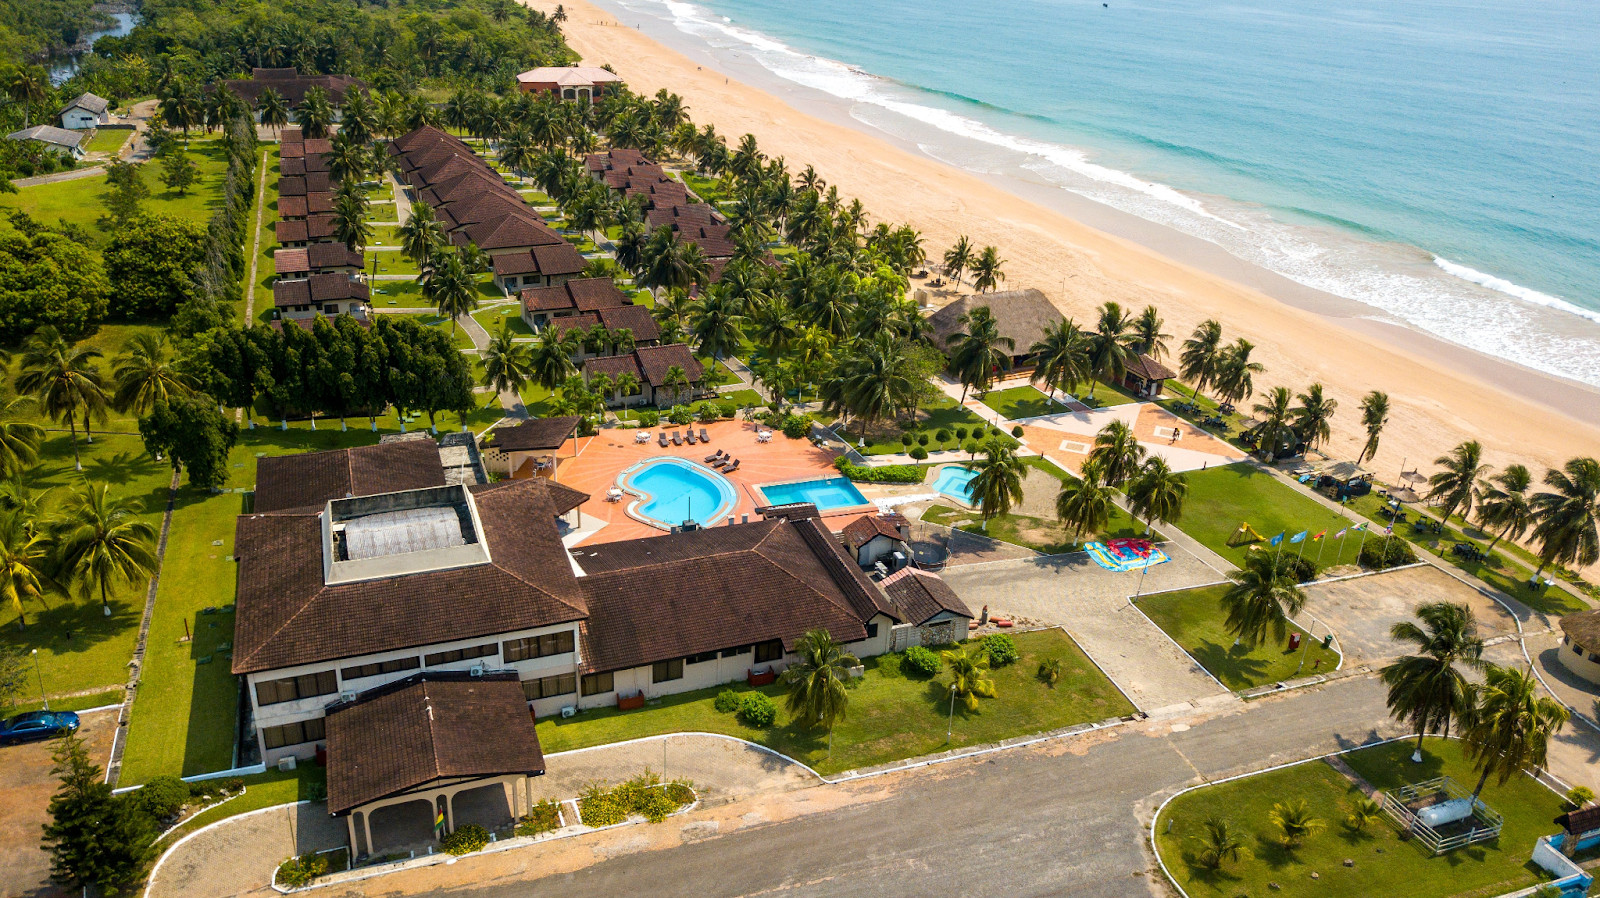 Busua  Beach Resort , one of the  Best Beaches to Visit  in Ghana 